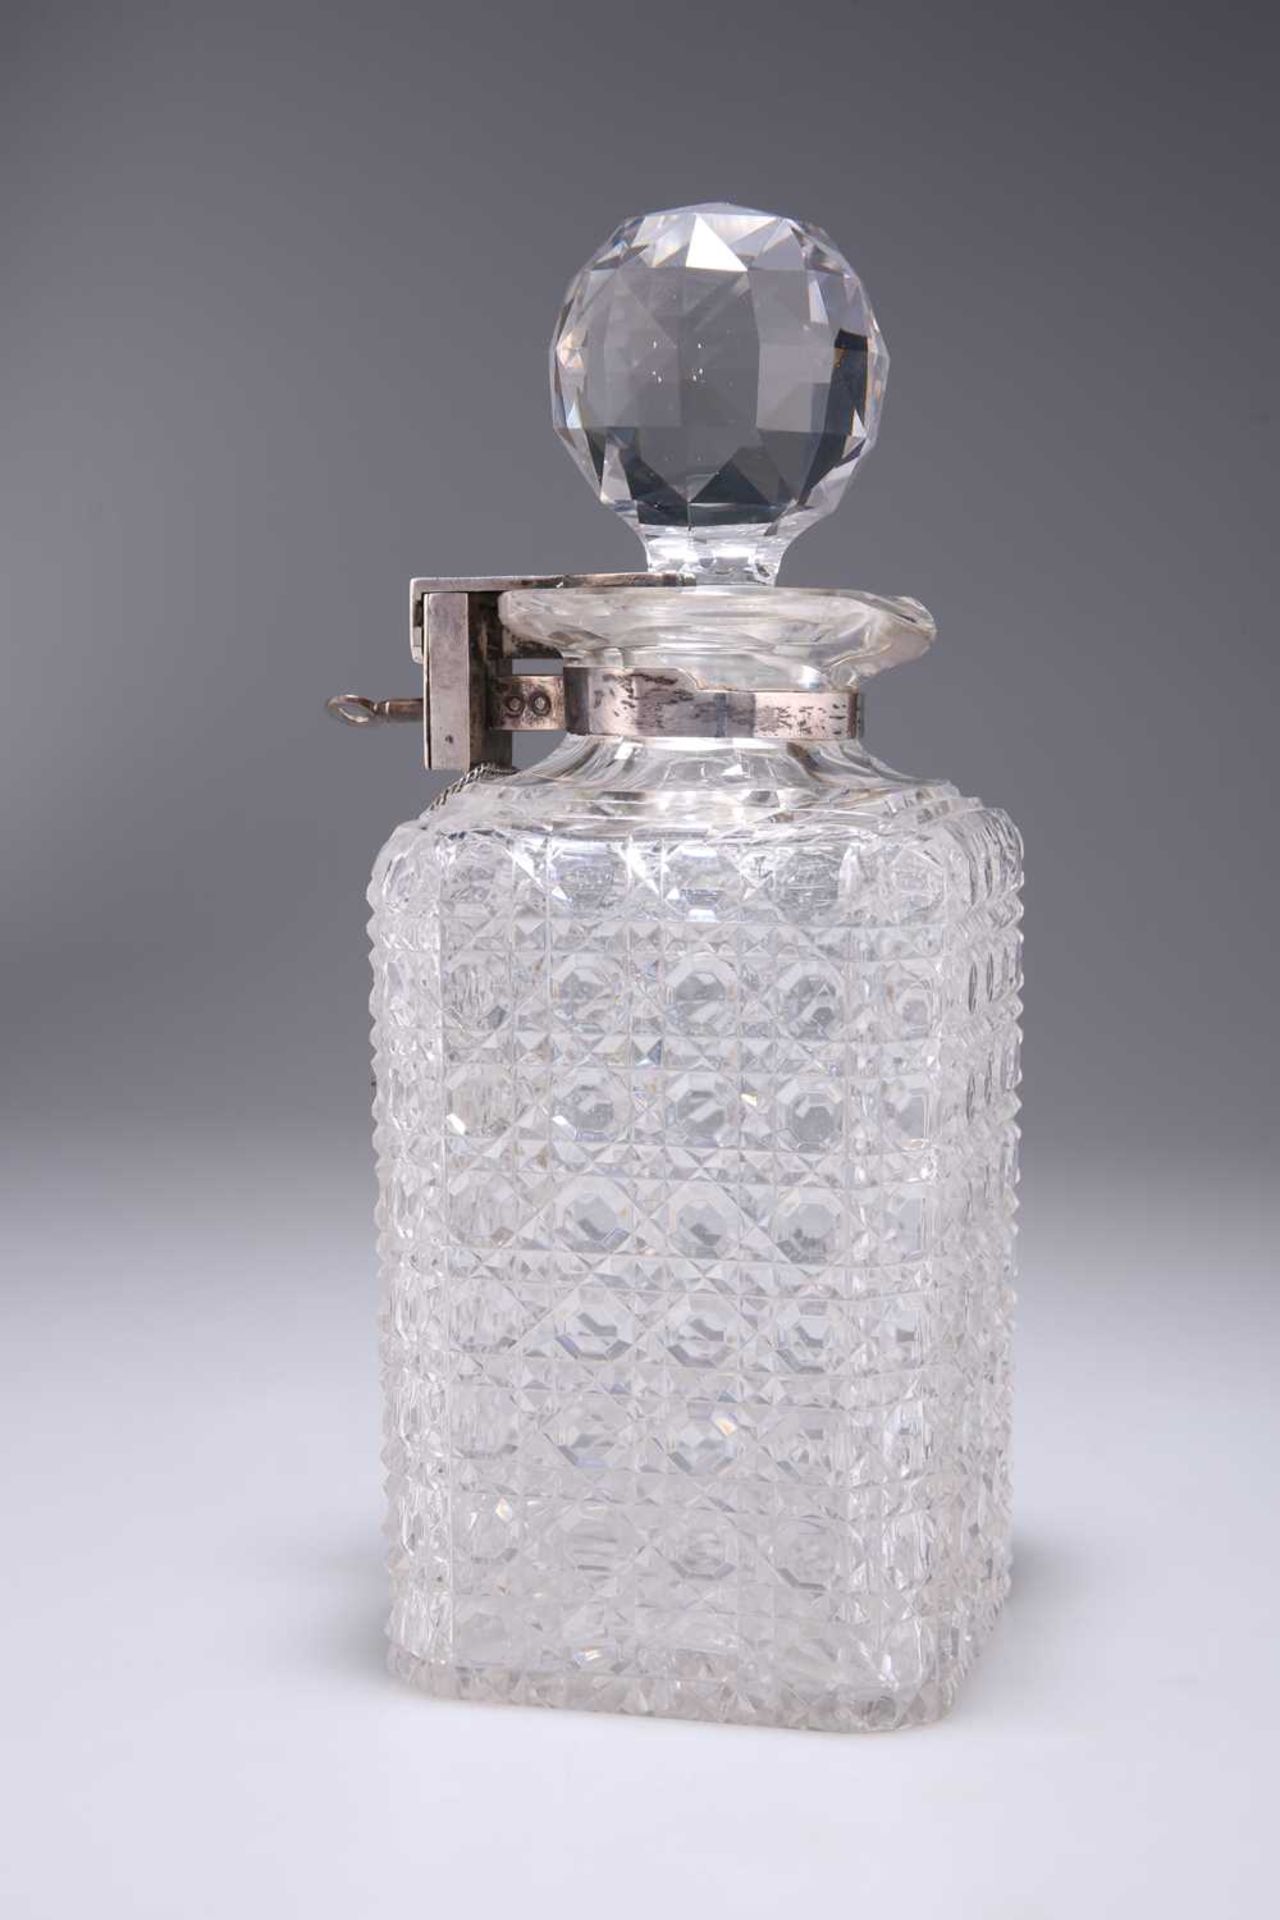 A VICTORIAN BETJEMANN'S PATENT SILVER-MOUNTED CUT-GLASS LOCKING DECANTER - Image 2 of 3